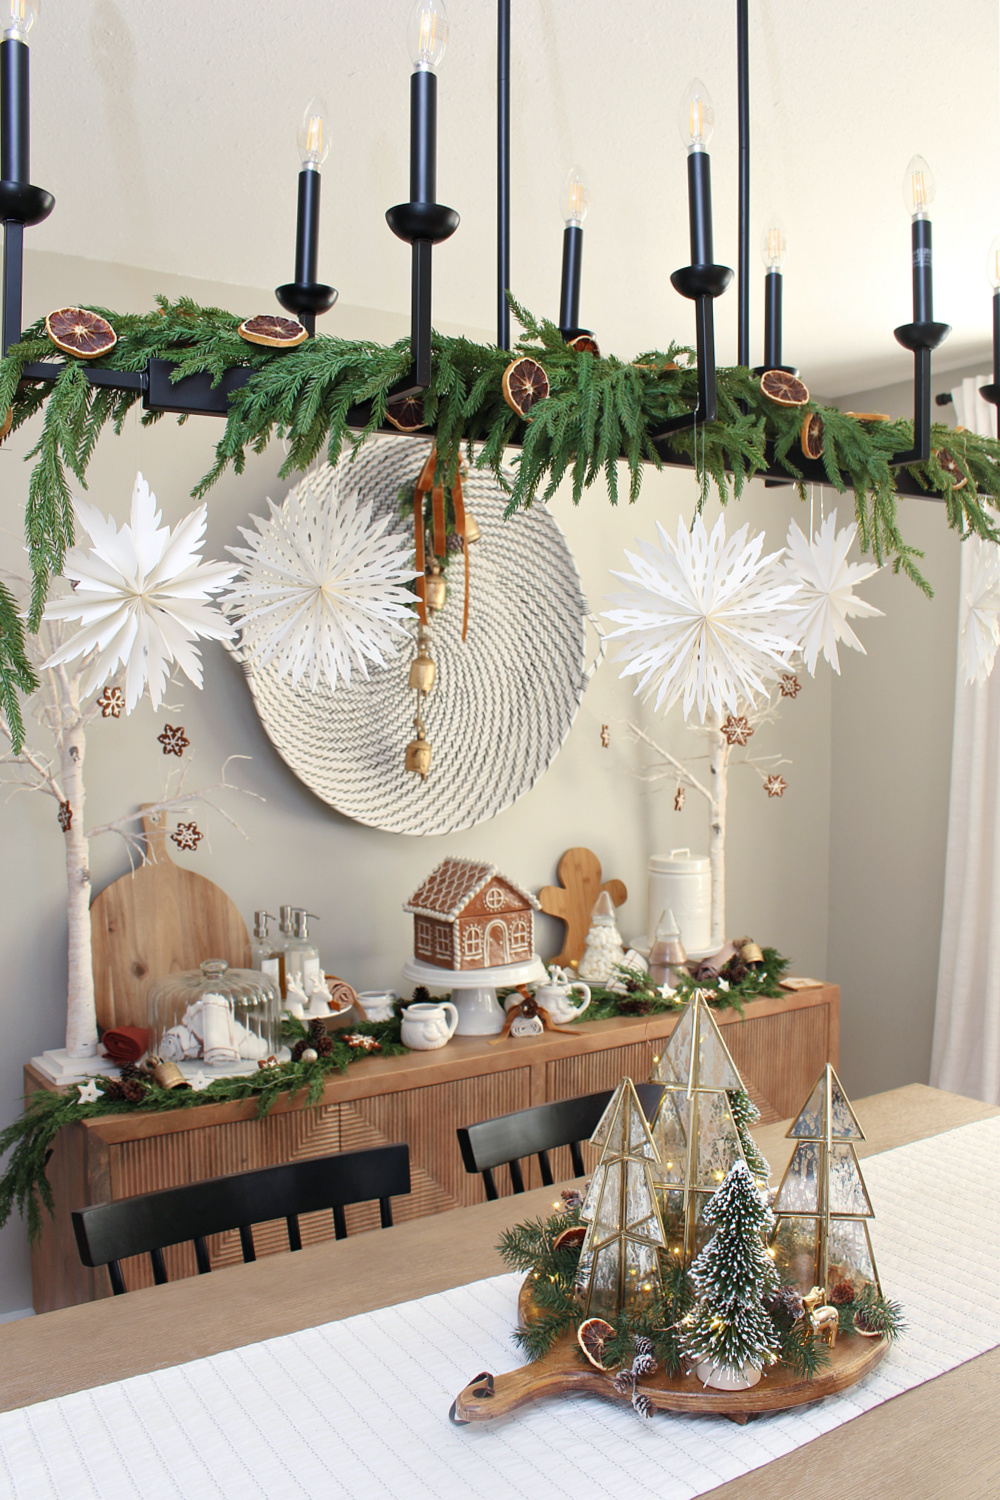 Modern dining room decorated for Christmas with a gingerbread house inspired theme.